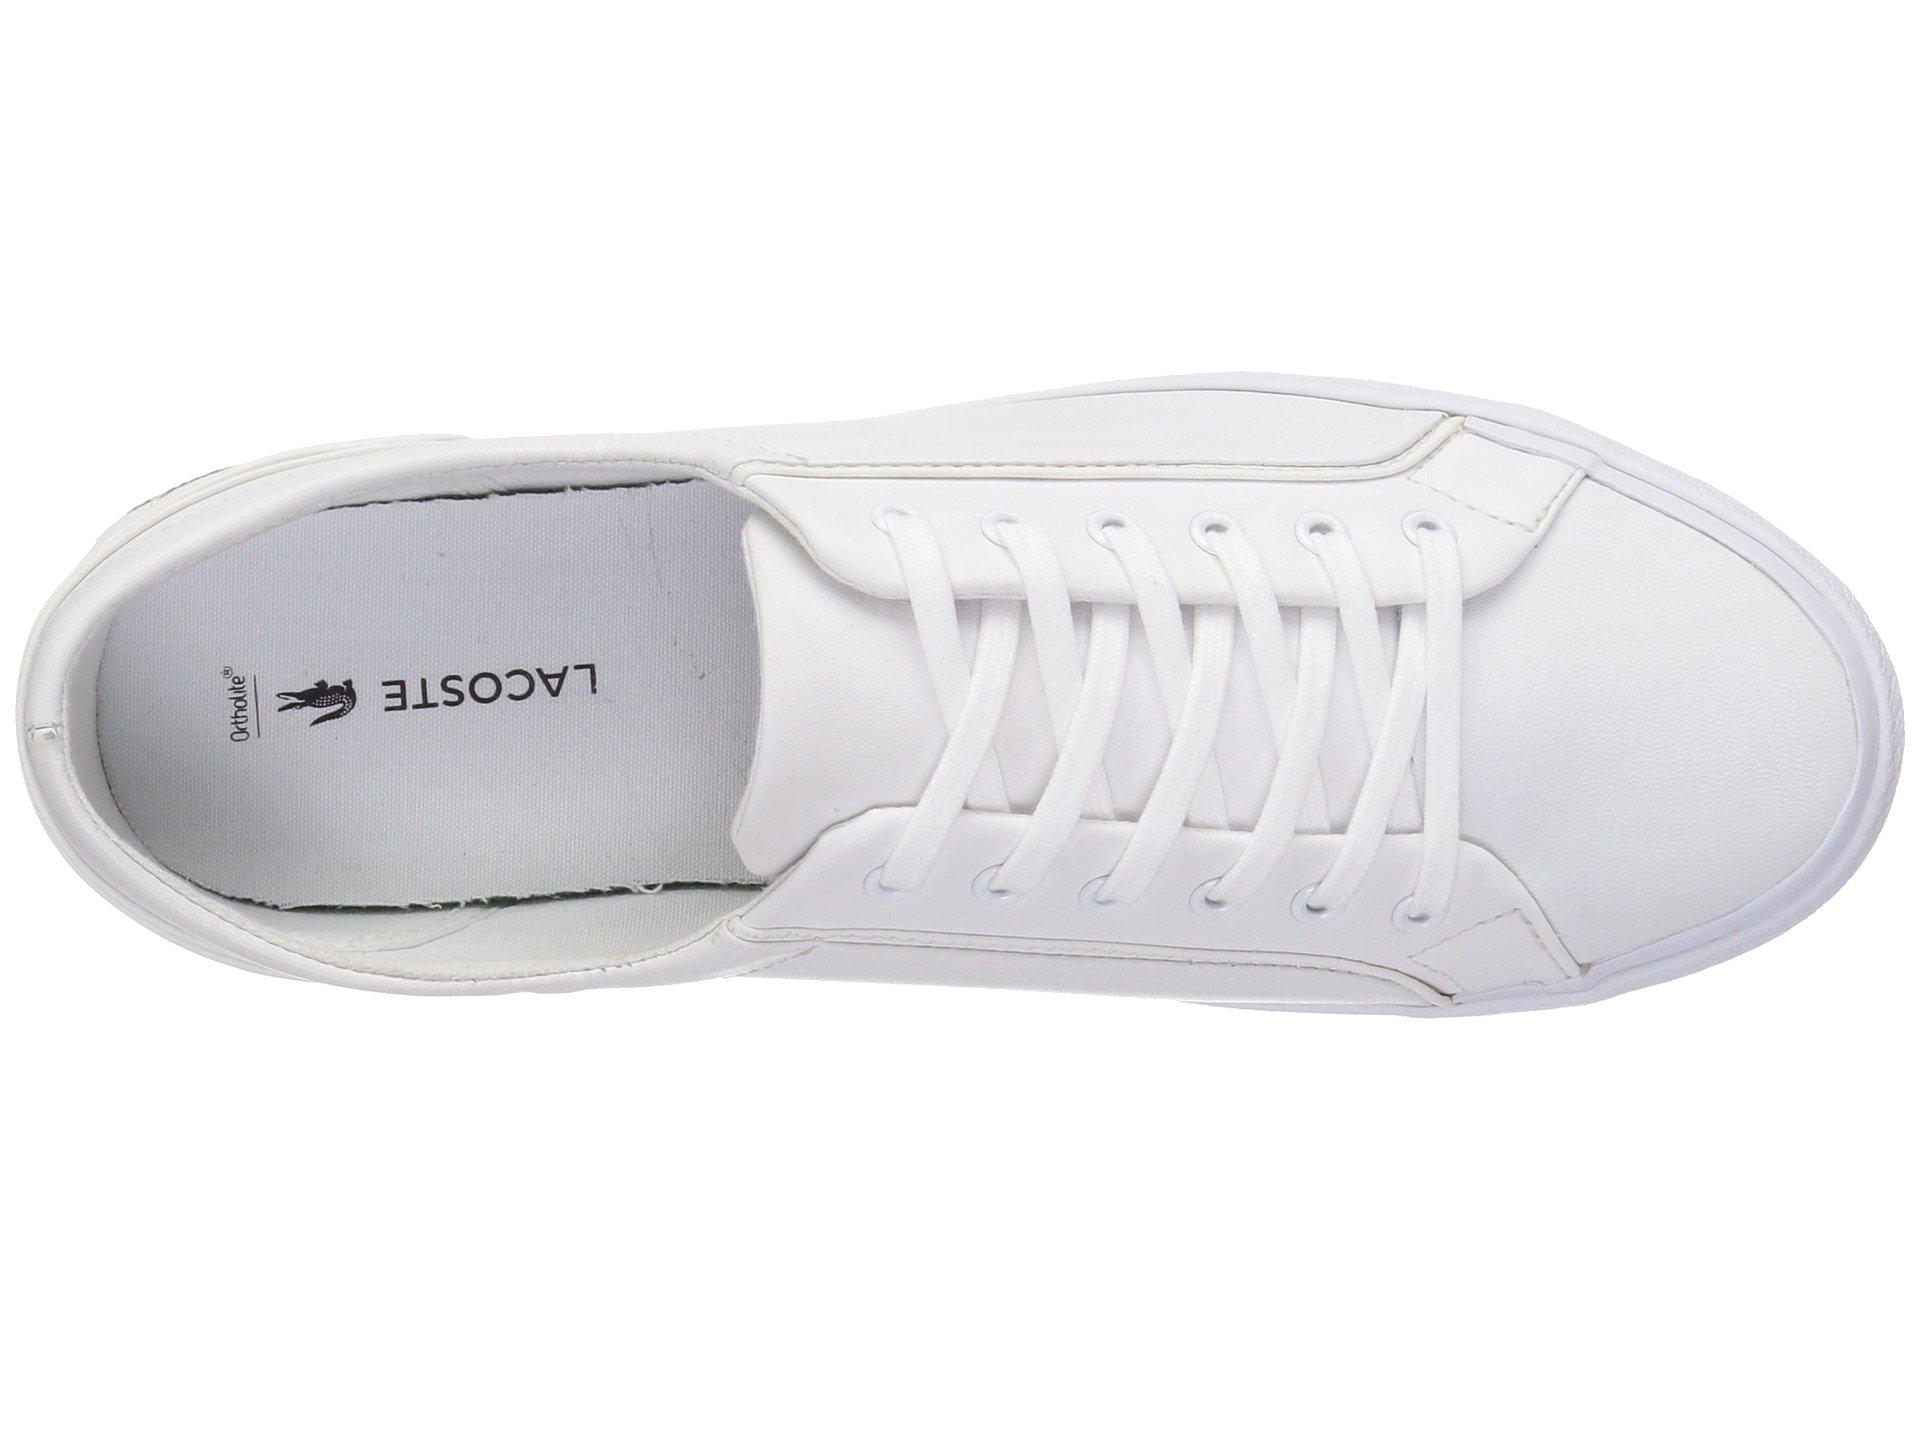 Lacoste Leather Lancelle Bl 1 in White 